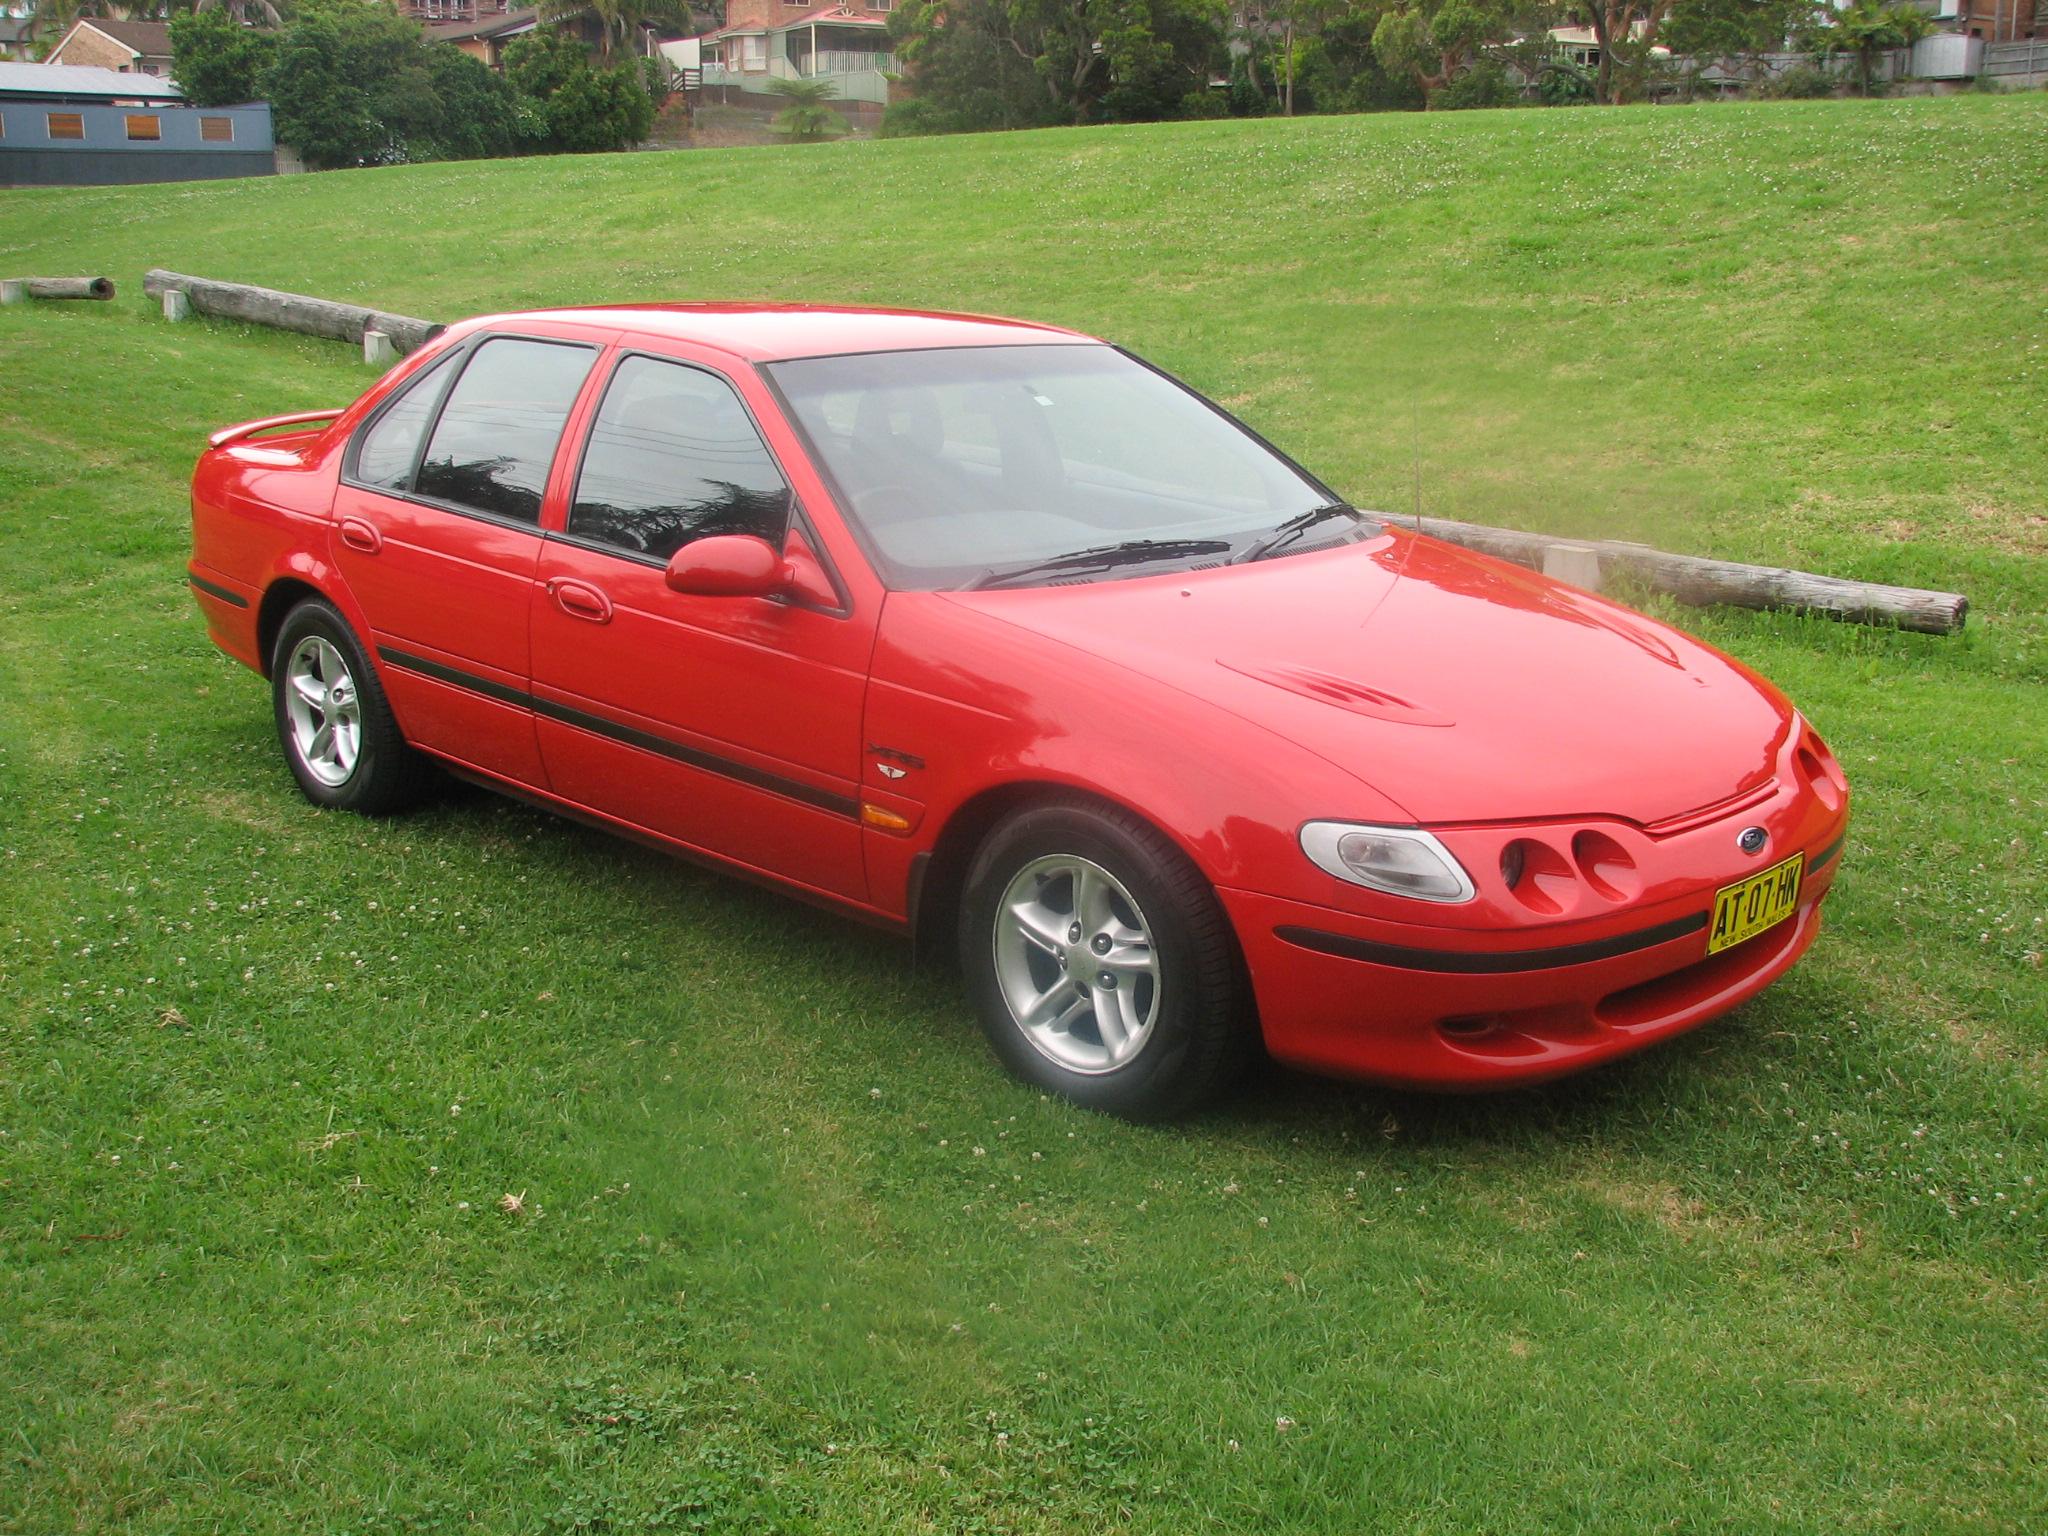 Image of Ford Falcon XR6